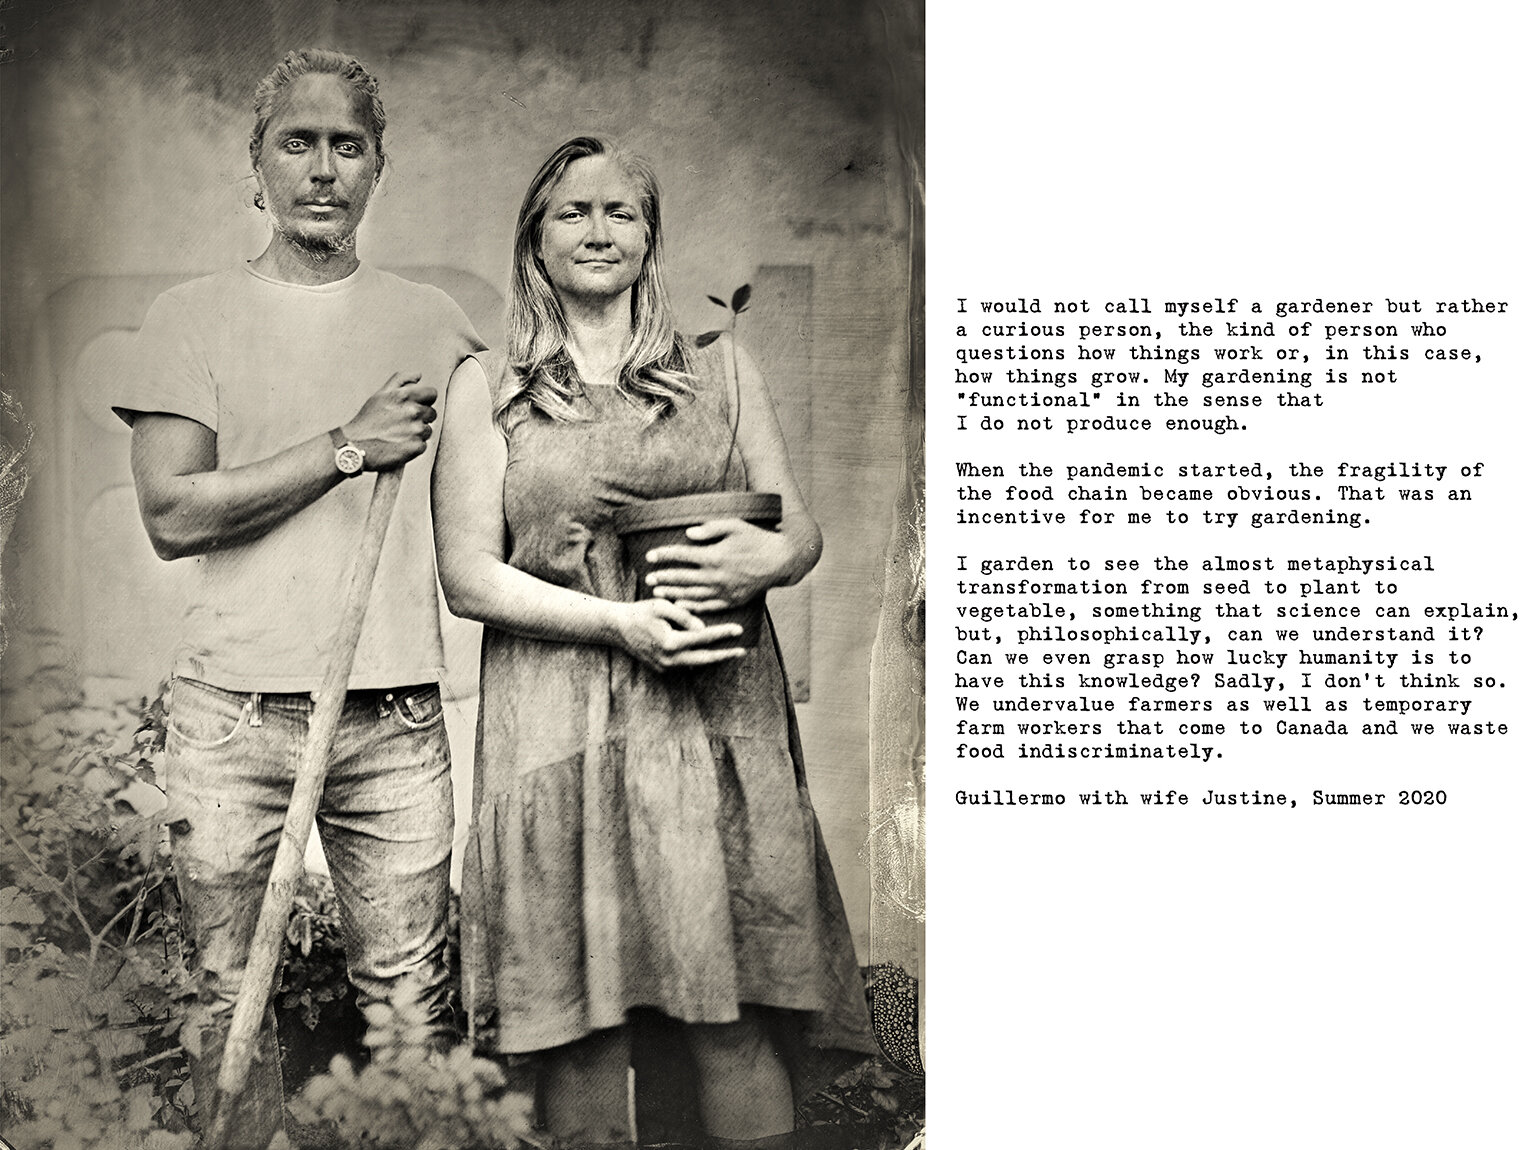 05_Guillermo with wife Justine_2020_Pigment Print on Rag from Wet Collodion Photographic Plate_24 in. x18 in._$1000.jpg